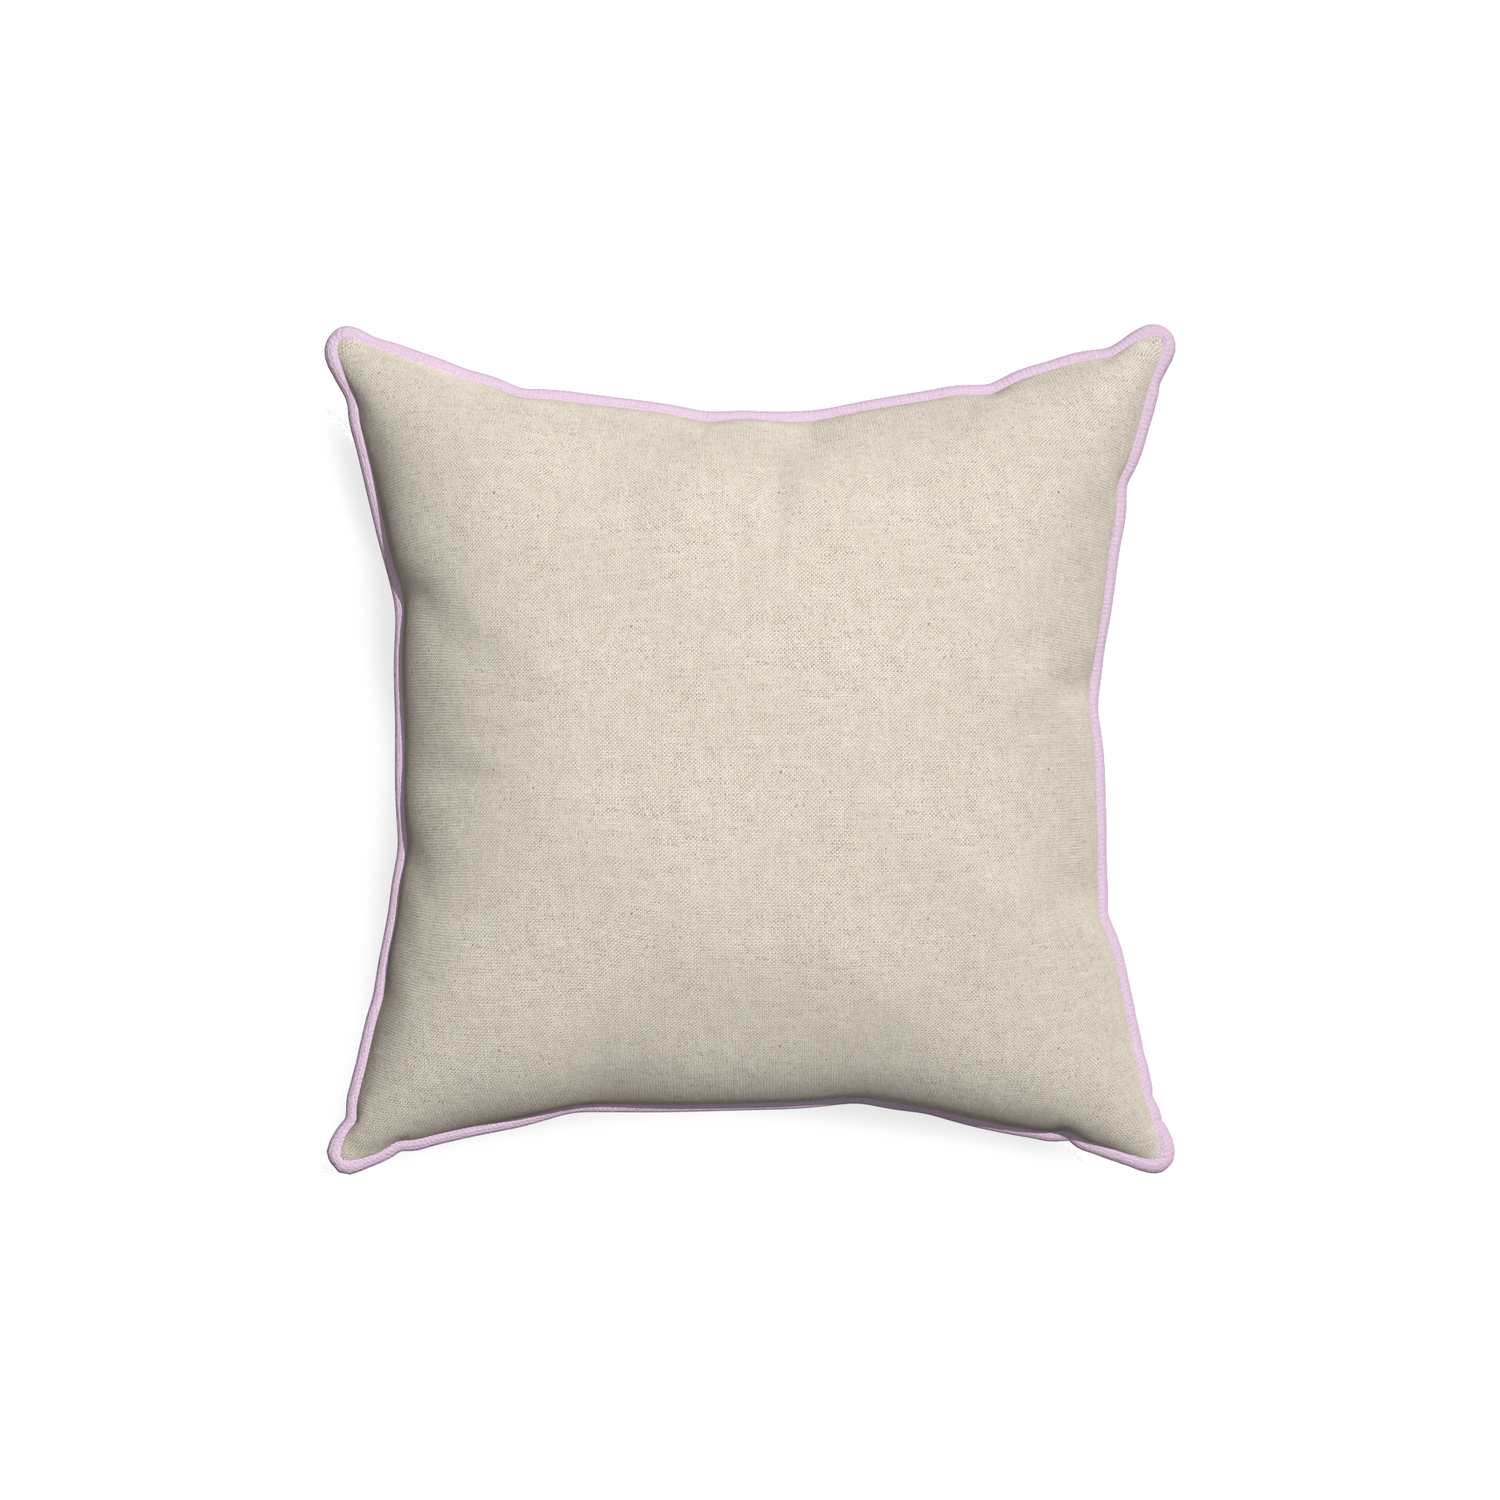 18-square oat custom light brownpillow with l piping on white background